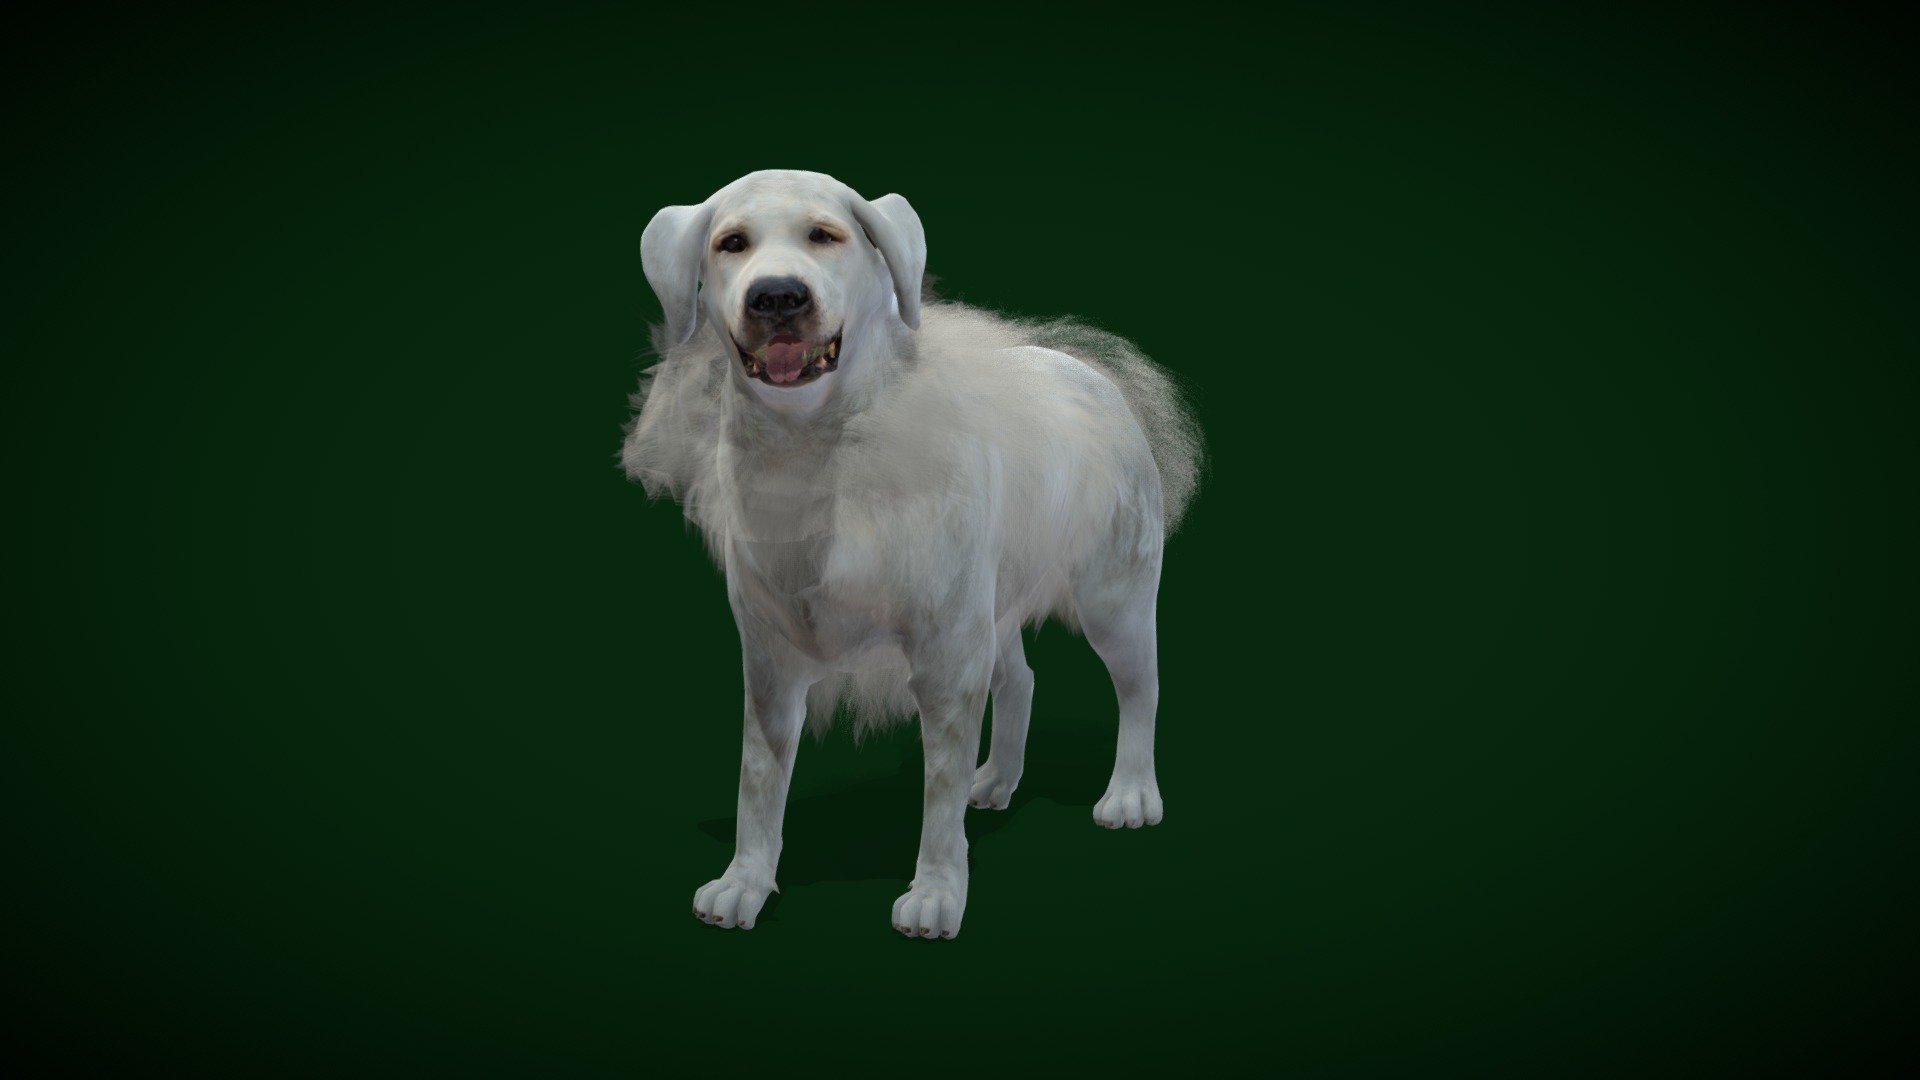 Great Pyrenees  Patou Dog( Pyrenean Mountain Dog or Chien de Montagne des Pyrénées ) French Breed ,Canine

Canis lupus familiaris Animal Mammal(livestock guardian dog) 

4 Draw Calls

Hair-cards

Game Ready Asset

Subdivision Surface Ready

9- Animations

4K PBR Textures Material

Unreal FBX (Unreal 4,5 Plus)

Unity FBX

Blend File 3.6.5 LTS

USDZ File (AR Ready). Real Scale Dimension (Xcode ,Reality Composer, Keynote Ready)

Textures Files

GLB File (Unreal 5.1 Plus Native Support)


Gltf File ( Spark AR, Lens Studio(SnapChat) , Effector(Tiktok) , Spline, Play Canvas,Omiverse 




Triangles -43137 



Faces -42687

Edges -82255

Vertices -45564

Diffuse, Metallic, Roughness , Normal Map ,Specular Map,AO

The Pyrenean Mountain Dog or Chien de Montagne des Pyrénées is a French breed of livestock guardian dog; in France it is commonly called the Patou.
 - Great Pyrenees Patou Dog (GameReady) - Buy Royalty Free 3D model by Nyilonelycompany 3d model